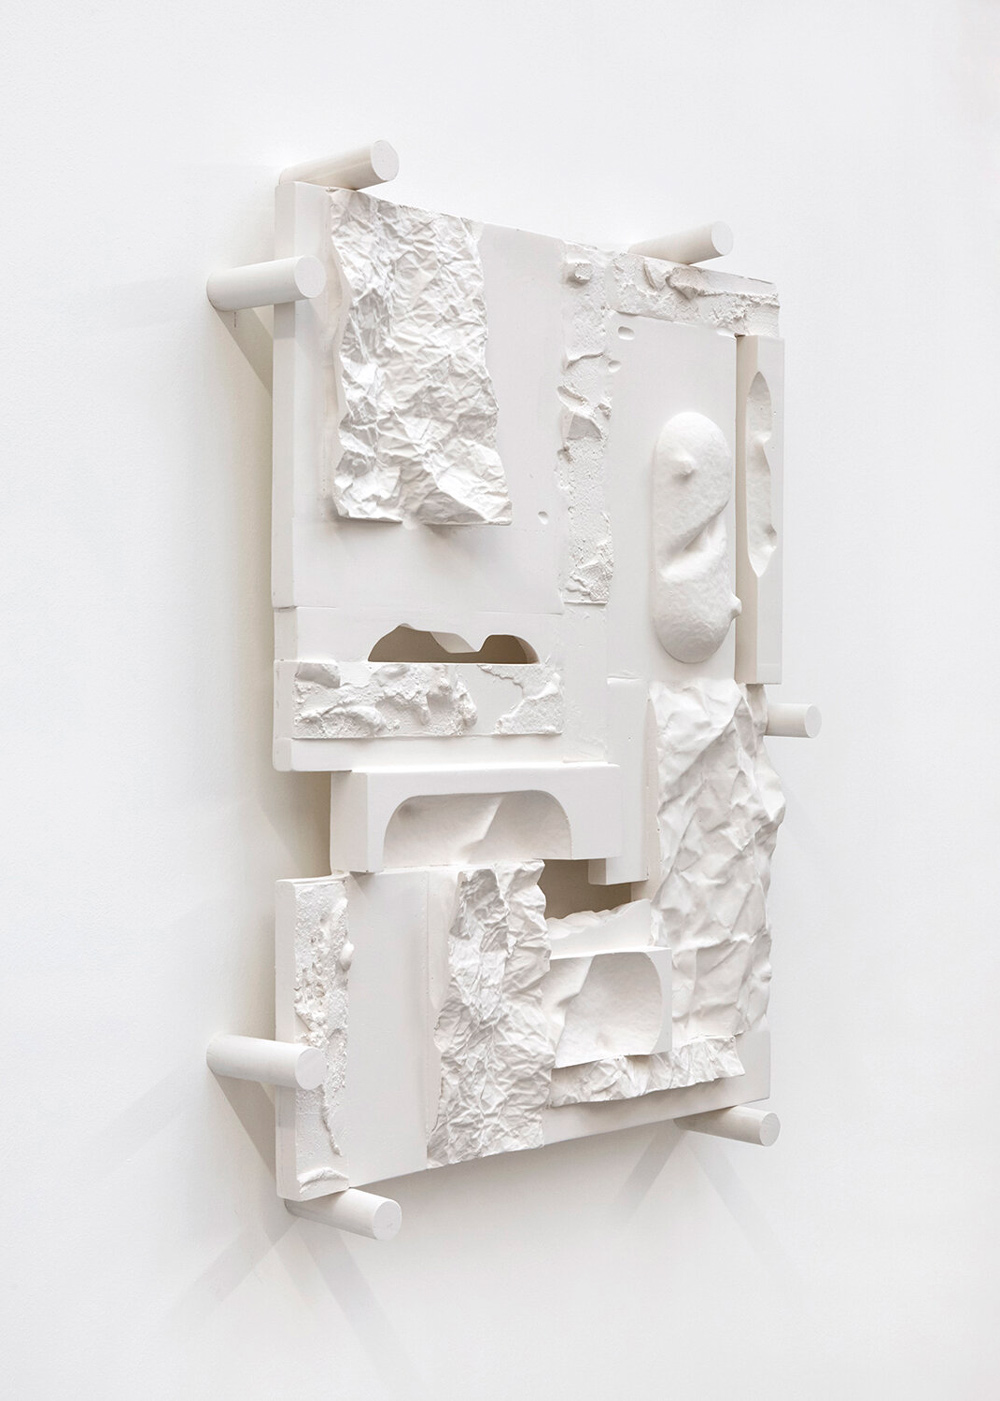 Claire Baily, Fragmentary actions of the broken hearted, 2019